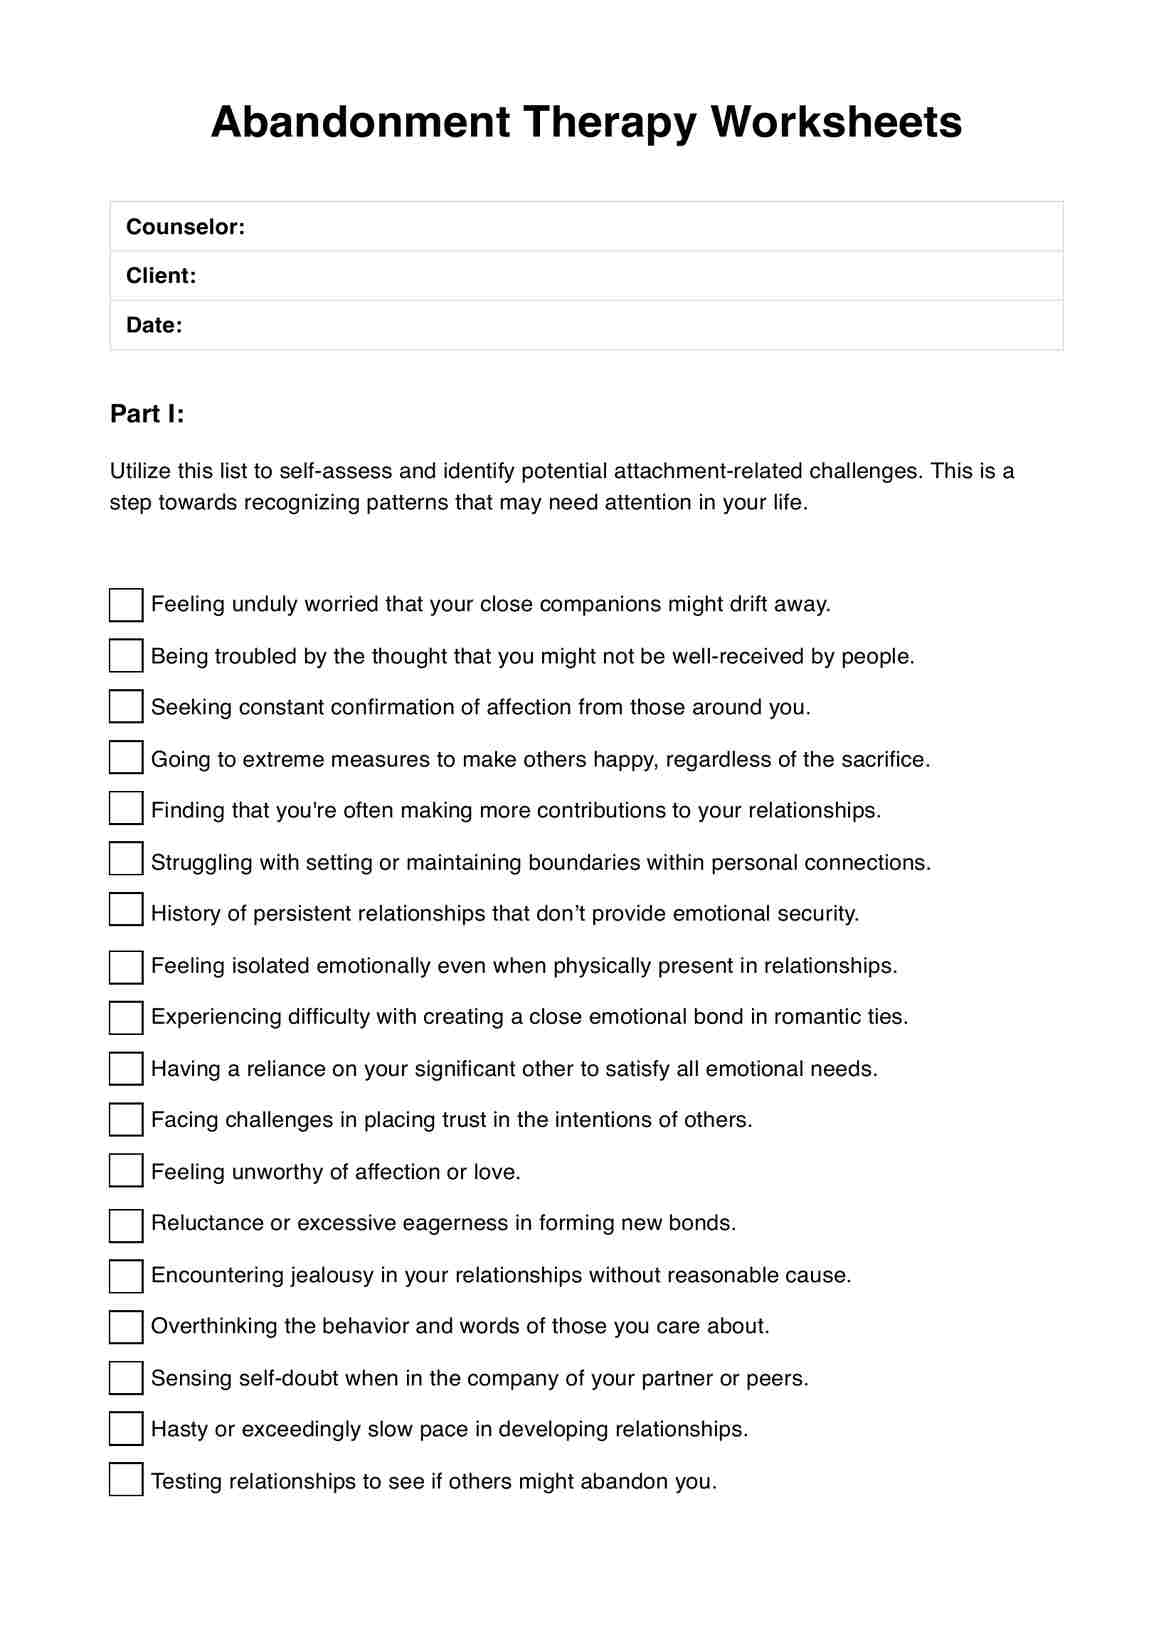 Abandonment Therapy Worksheets PDF Example